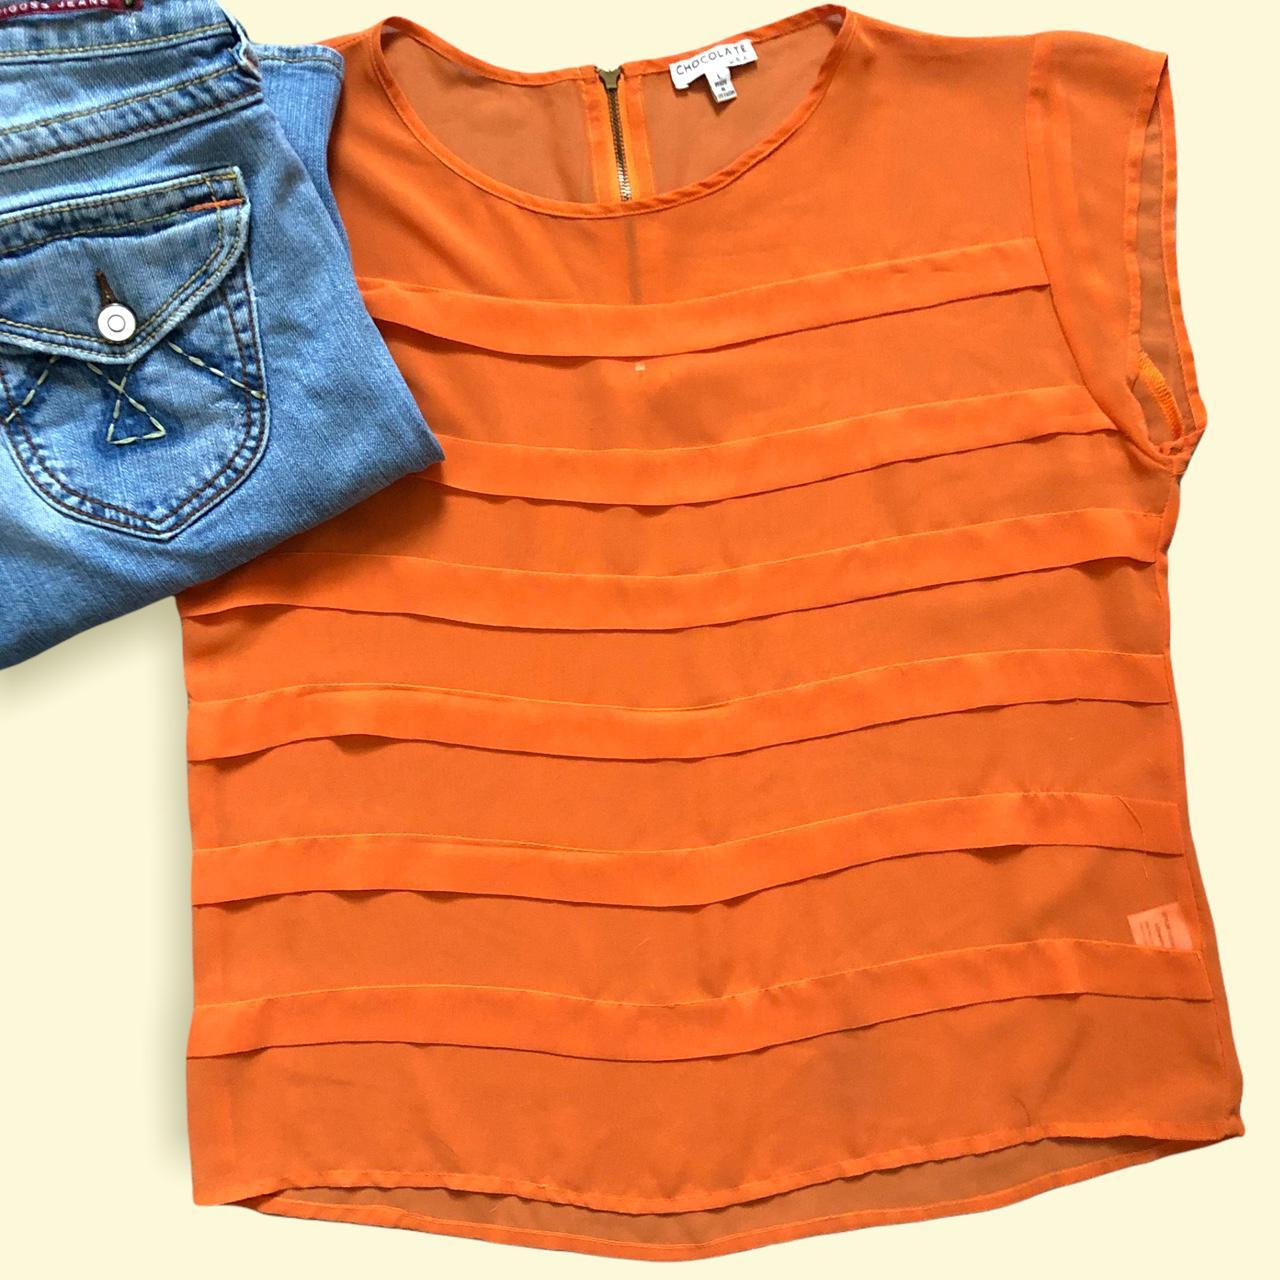 Product Image 1 - Orange front tiered boxy top